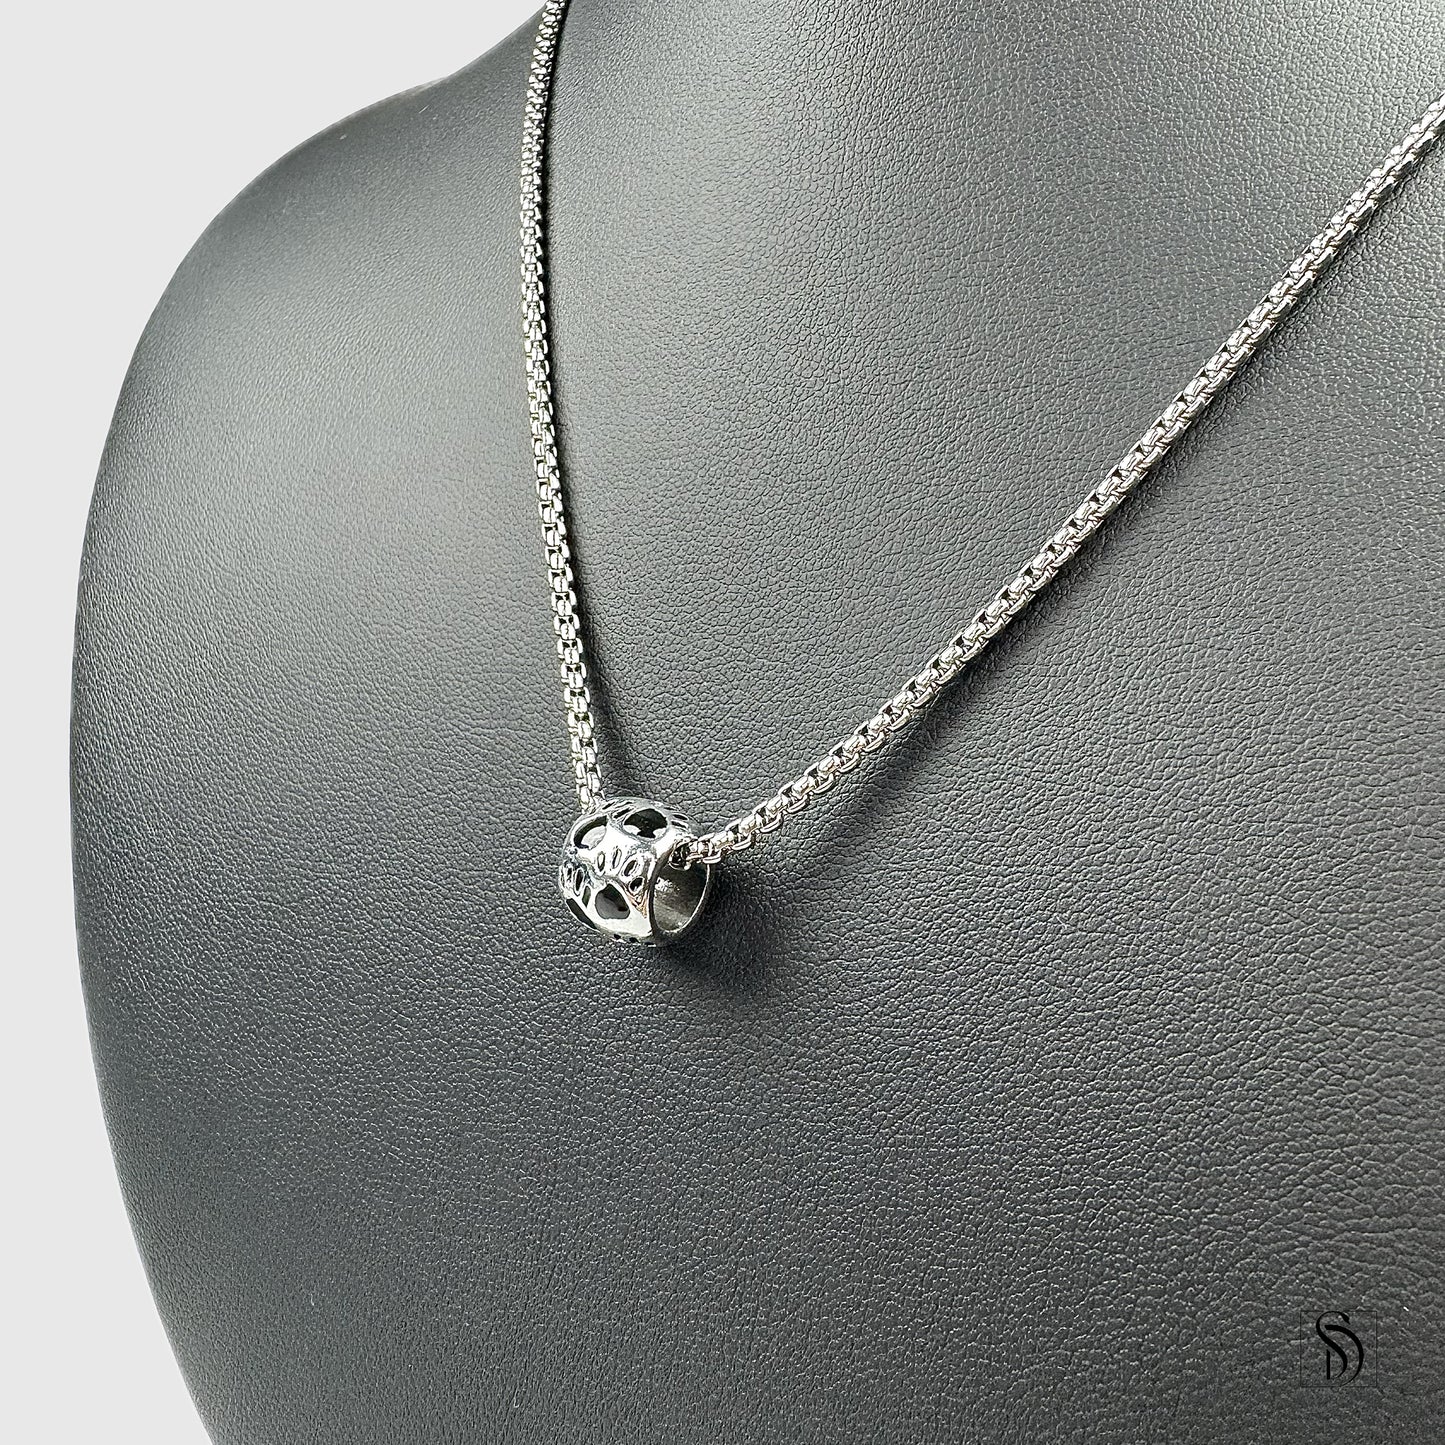 Silver Animal Paw Print Charm Necklace